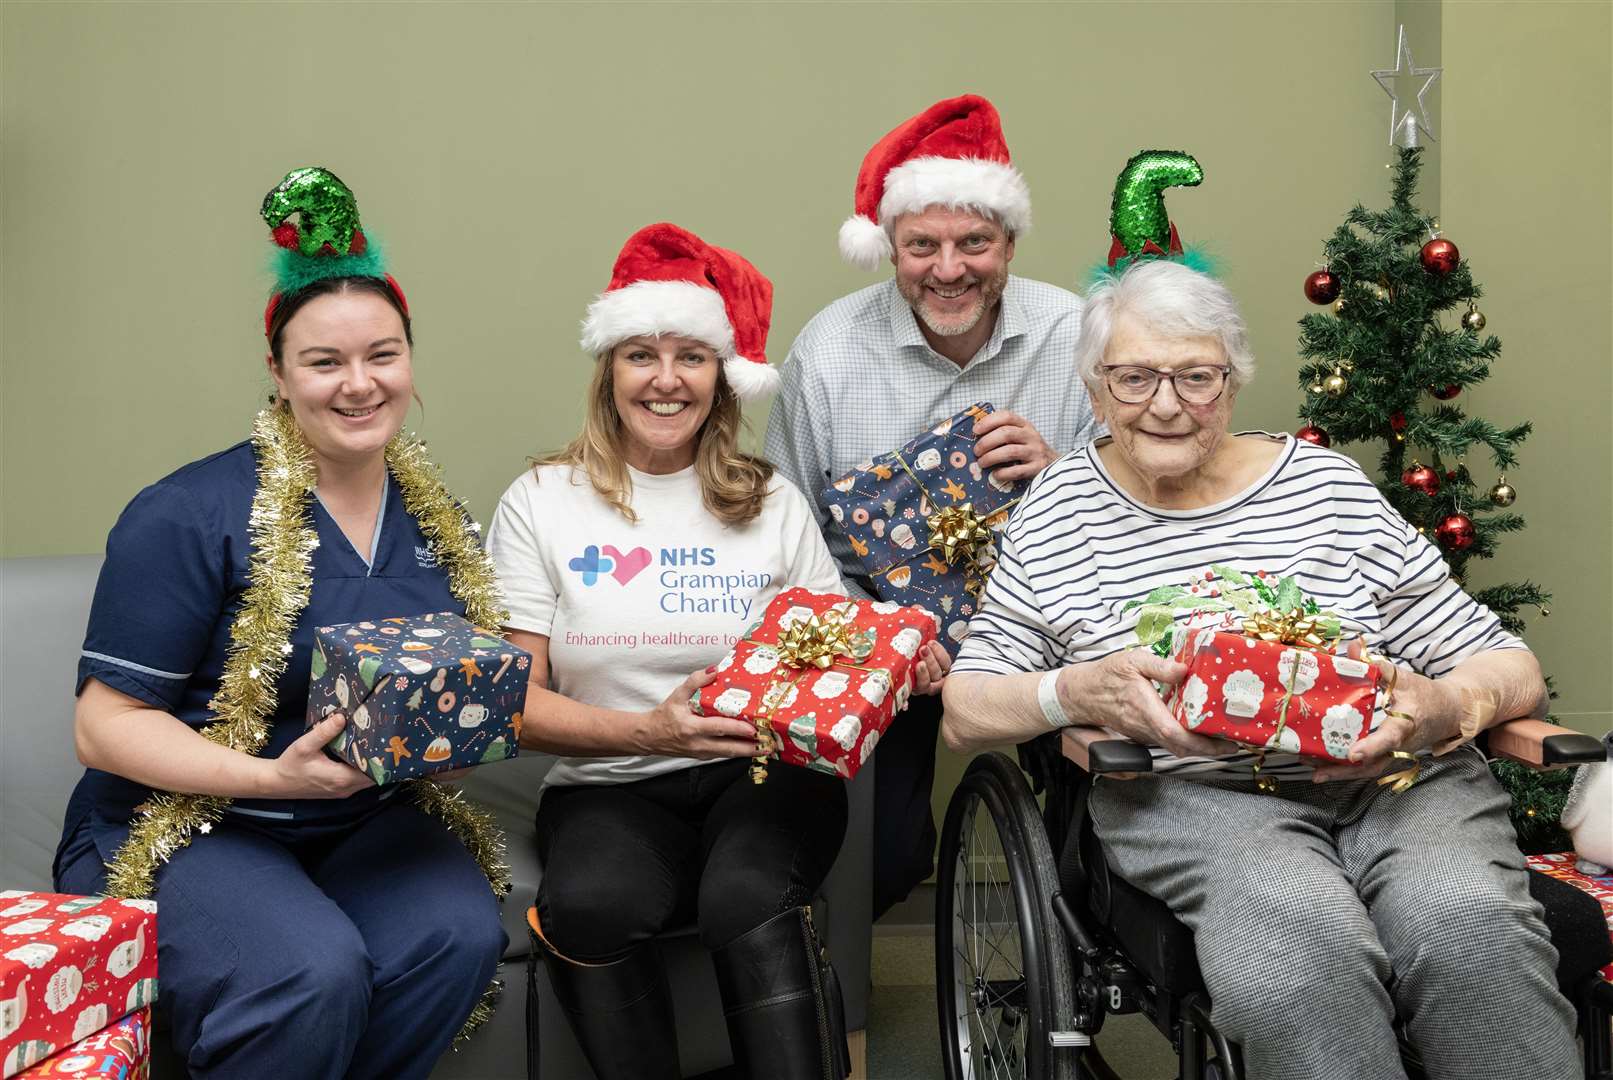 The NHS Grampian Charity has funded gifts for people who will be in hospital over Christmas.